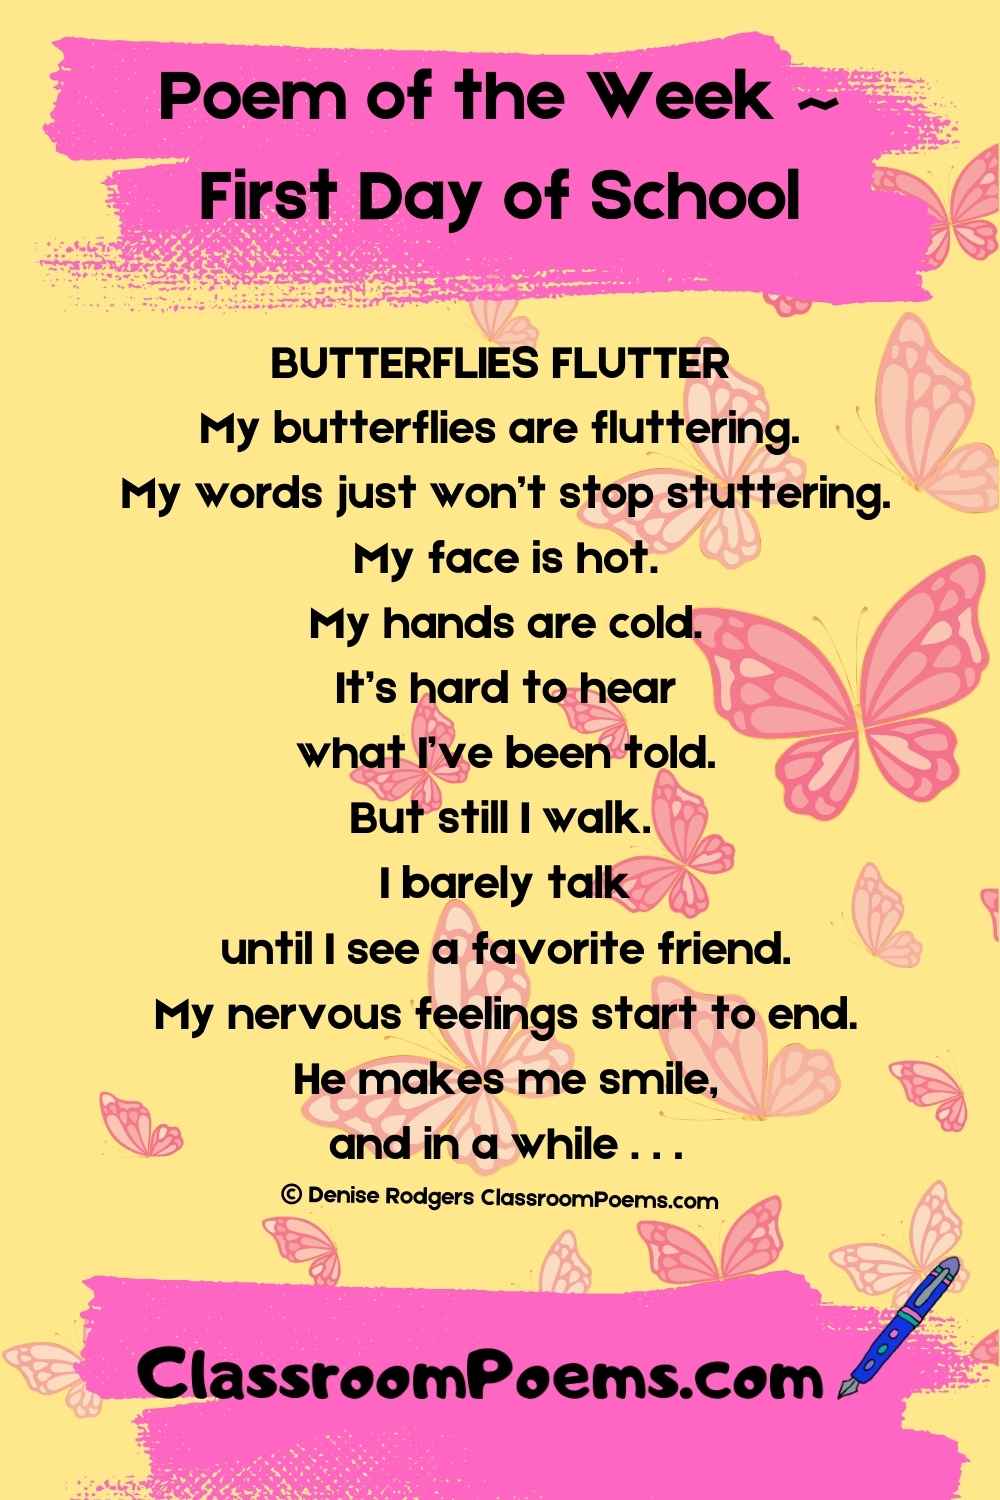 Butterflies on the first day of school. A poem by Denise Rodgers on ClassroomPoems.com.